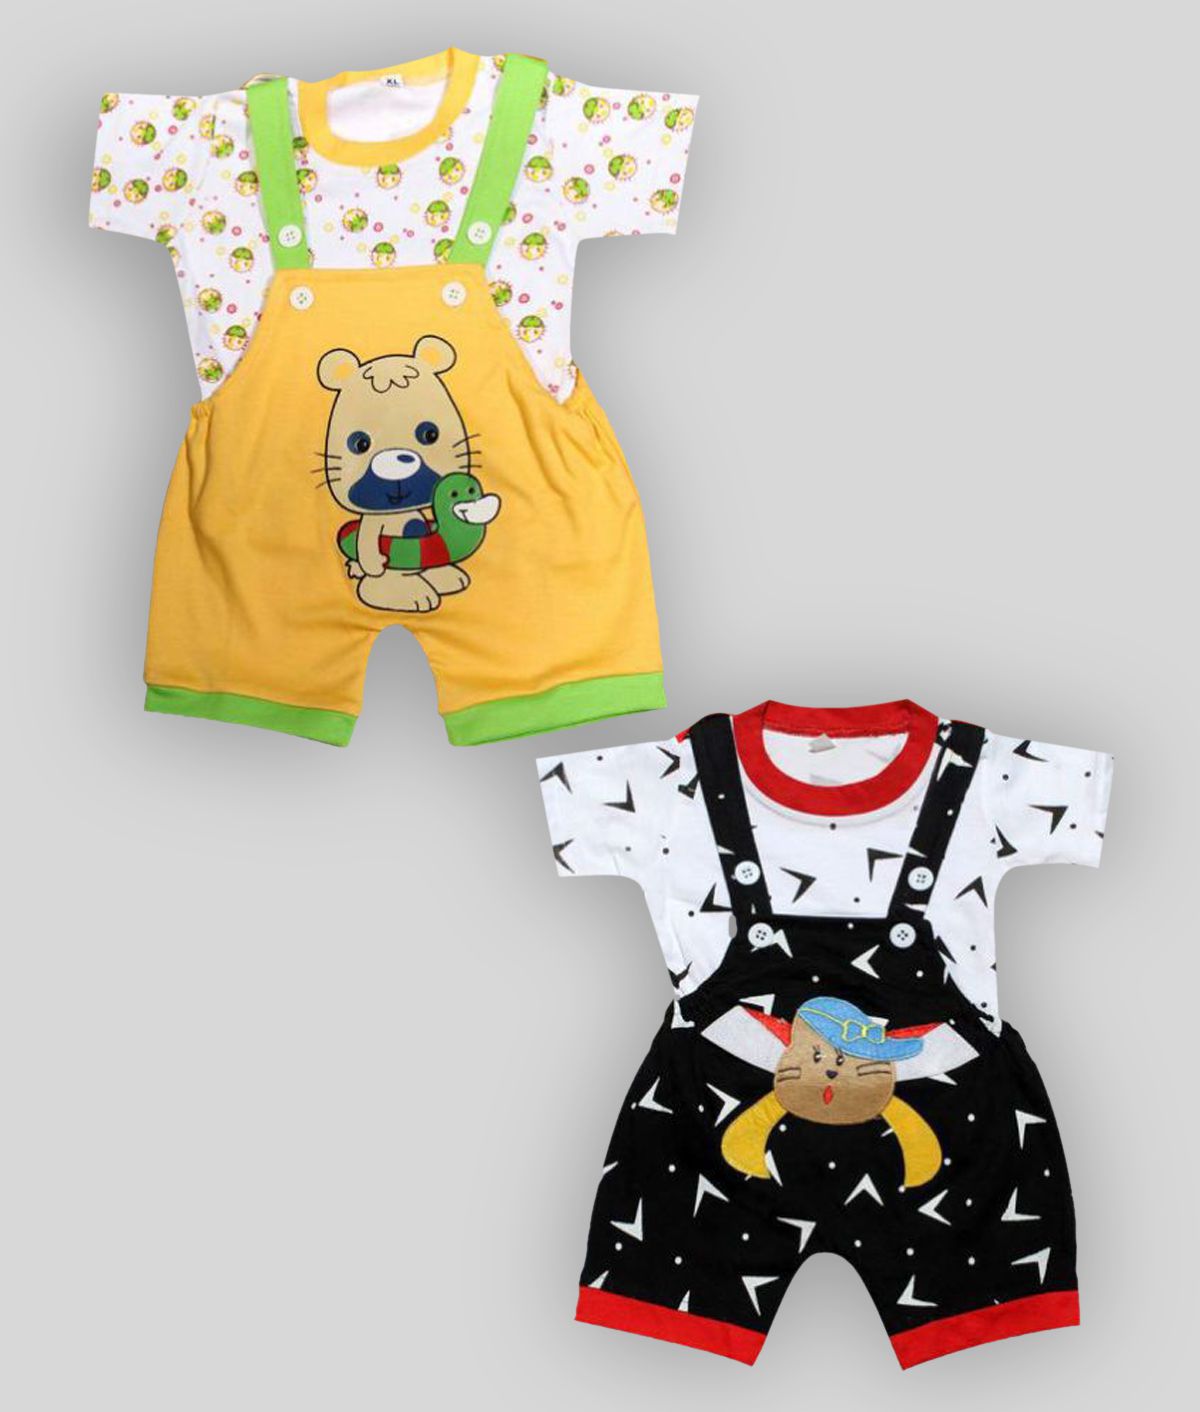     			babeezworld dungaree for Boys & Girls casual printed pure cotton-Pack of 2 (9101990001239; Multi Colour)